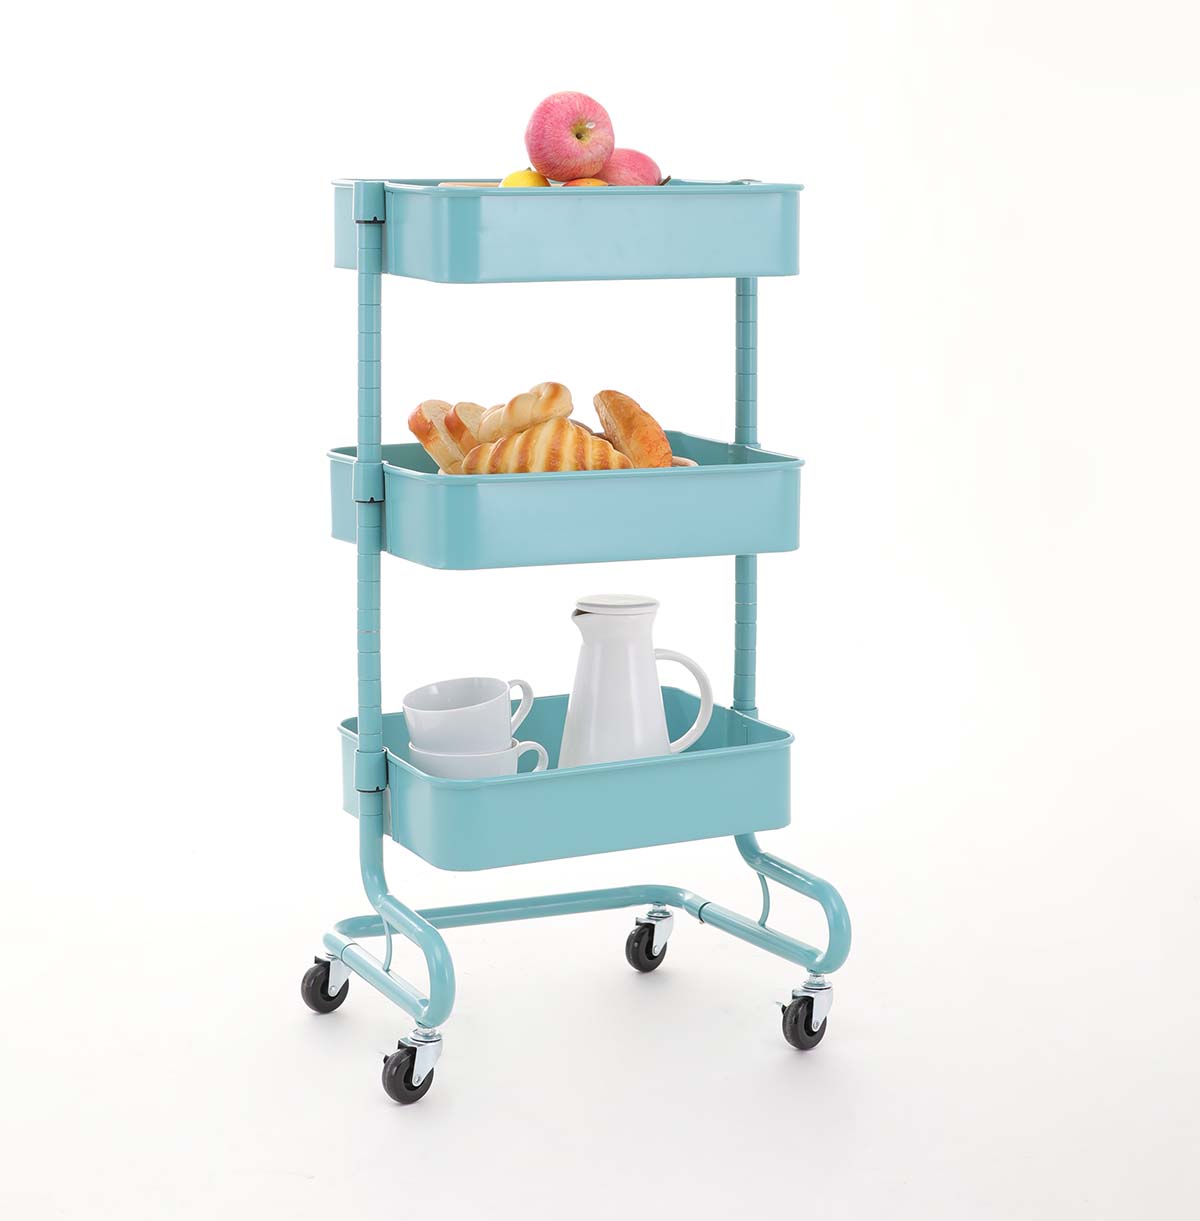 3 tier wire shelving unit Solution